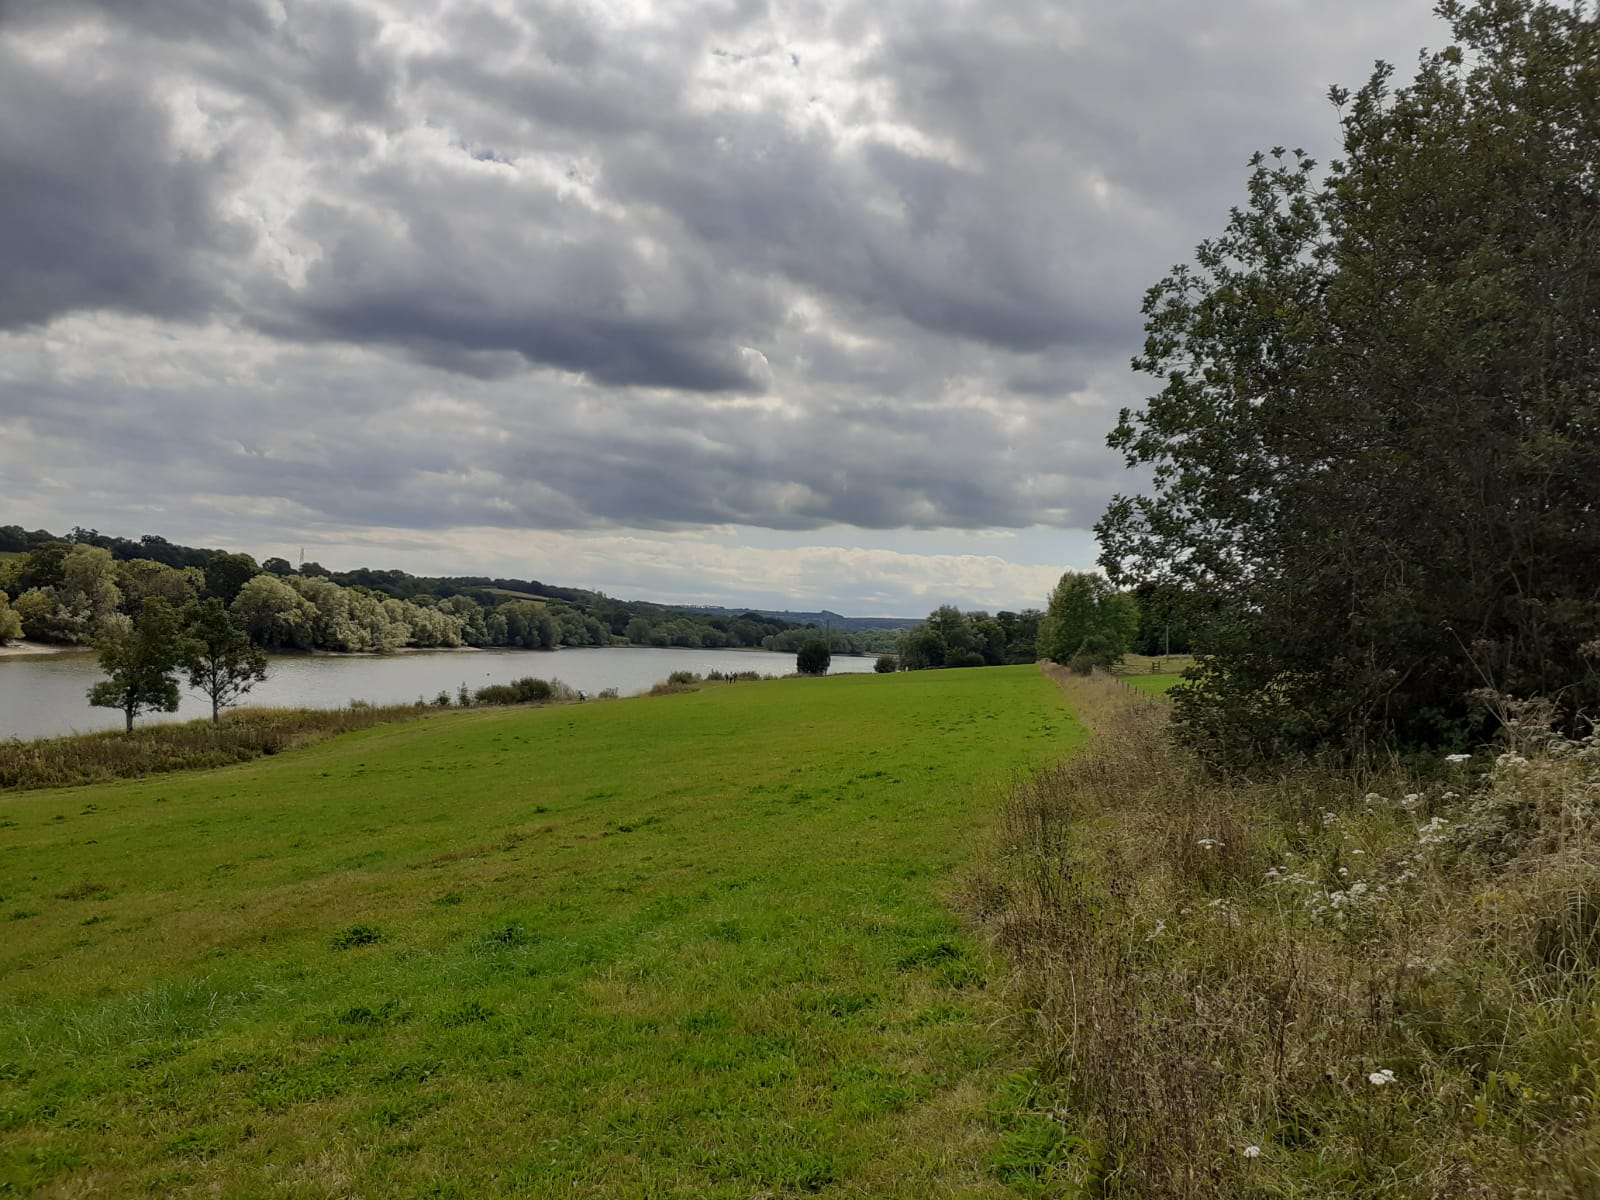 Green field with the silvery shores of the reservoir